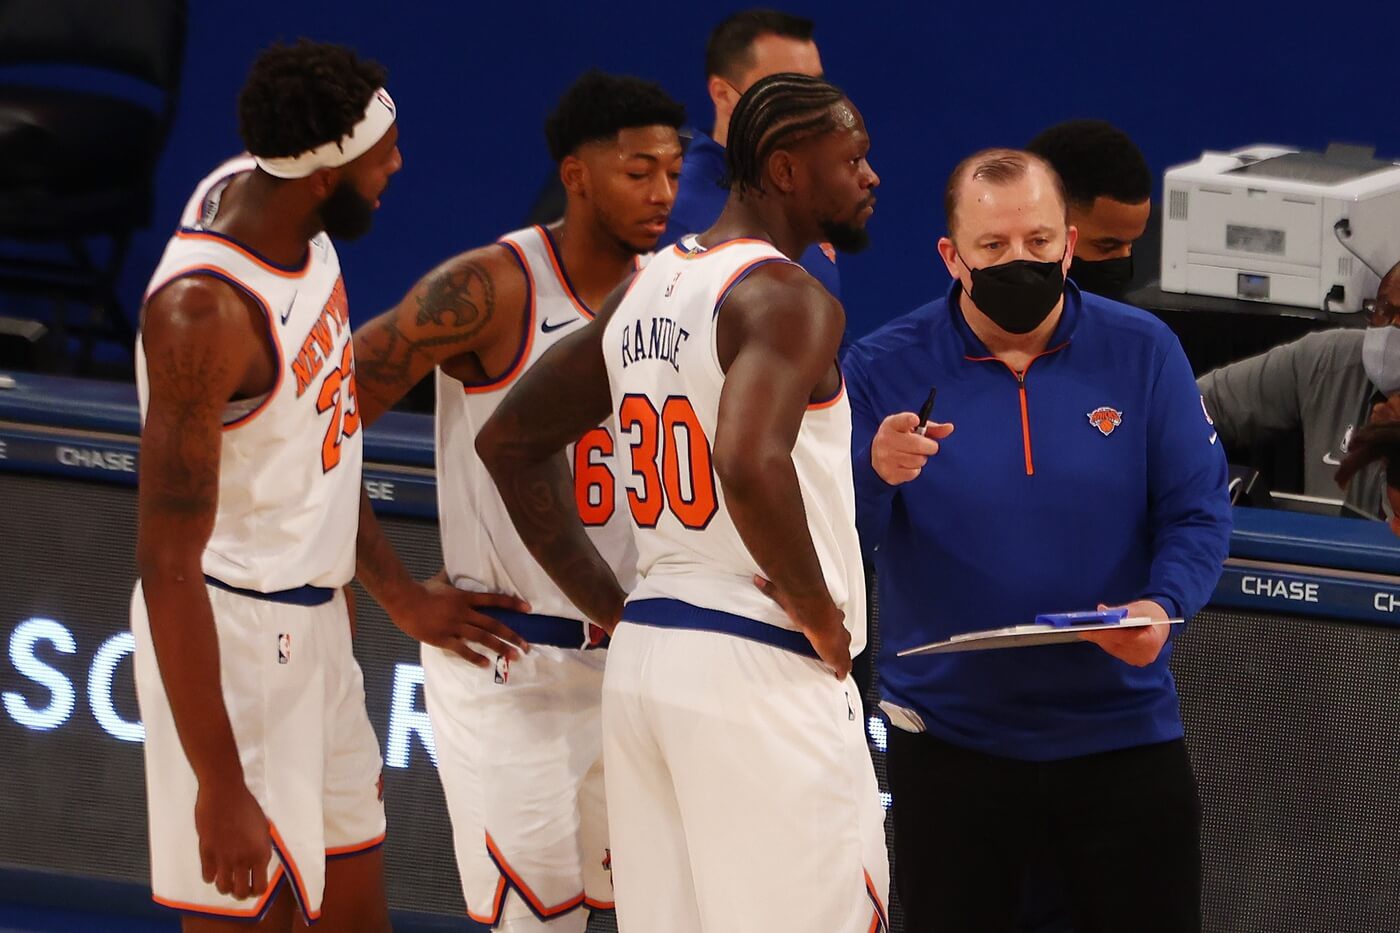 Feb 7, 2021; New York, New York, USA; Head coach Tom Thibodeau of the New York Knicks speaks with Julius Randle #30 during the game against the Miami Heat at Madison Square Garden on February 07, 2021 in New York City.